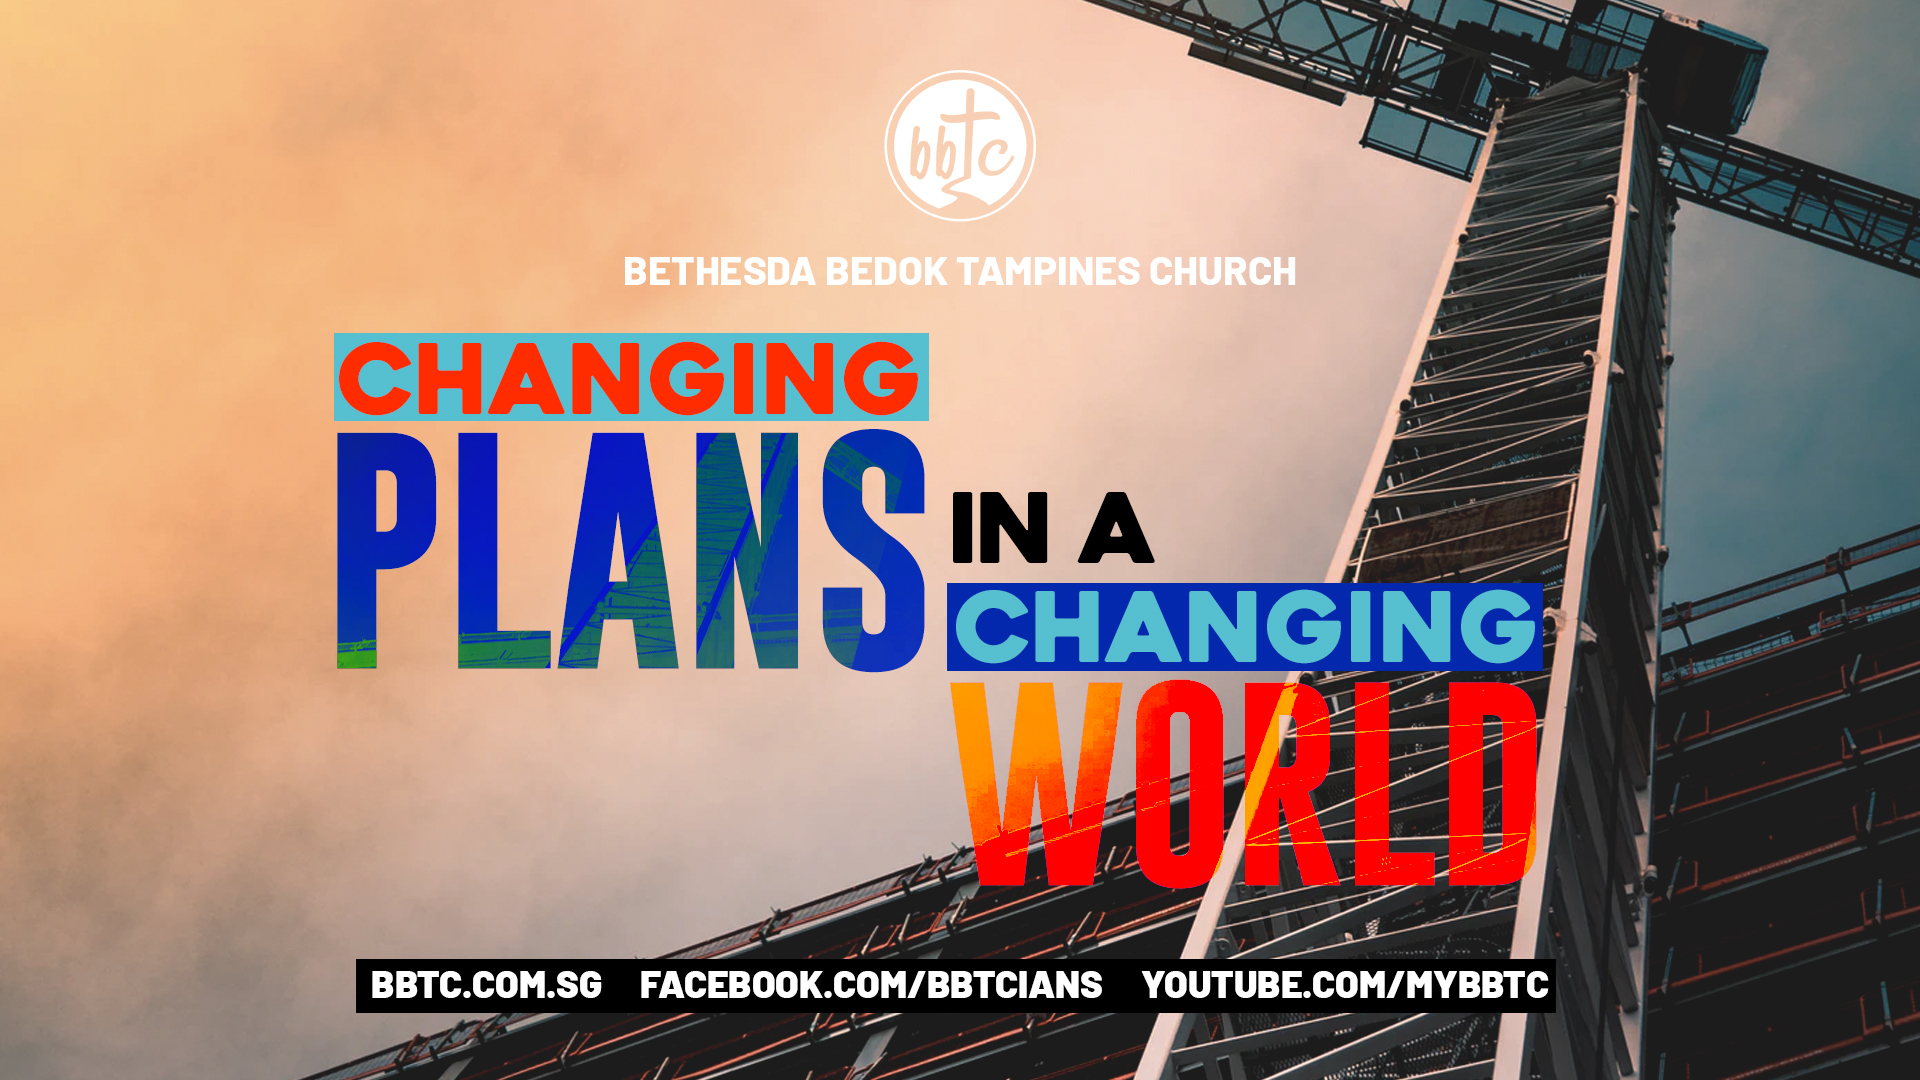 CHANGING PLANS IN A CHANGING WORLD